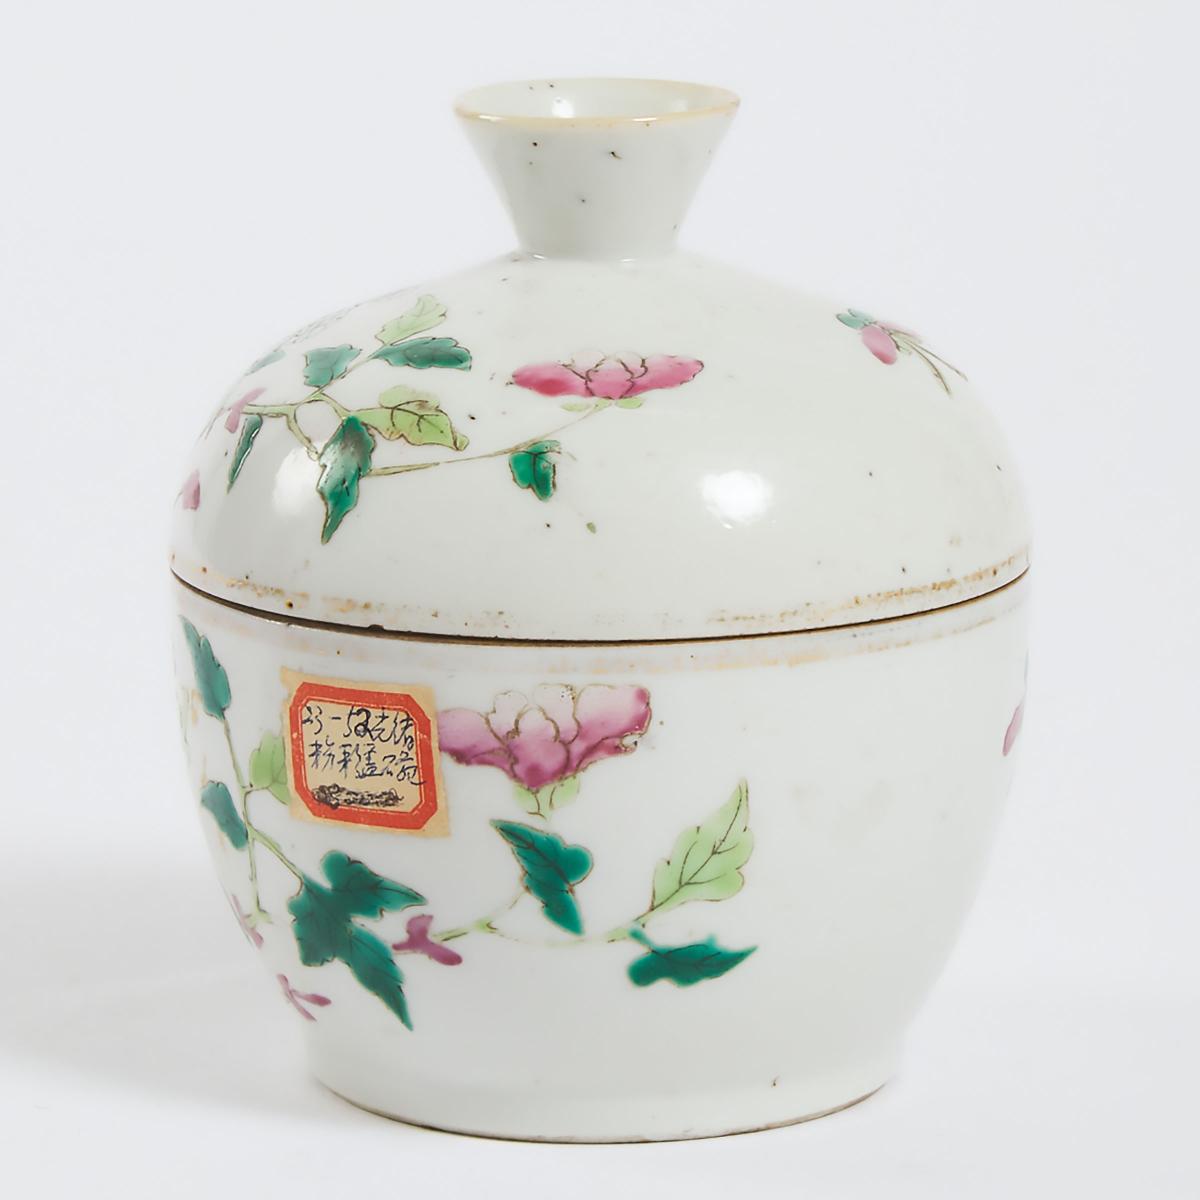 A Chinese Enameled Porcelain Bowl and Cover, Tongzhi Mark, Republican Period, 民国时期 同治款彩瓷盖碗, height 4 - Image 2 of 4